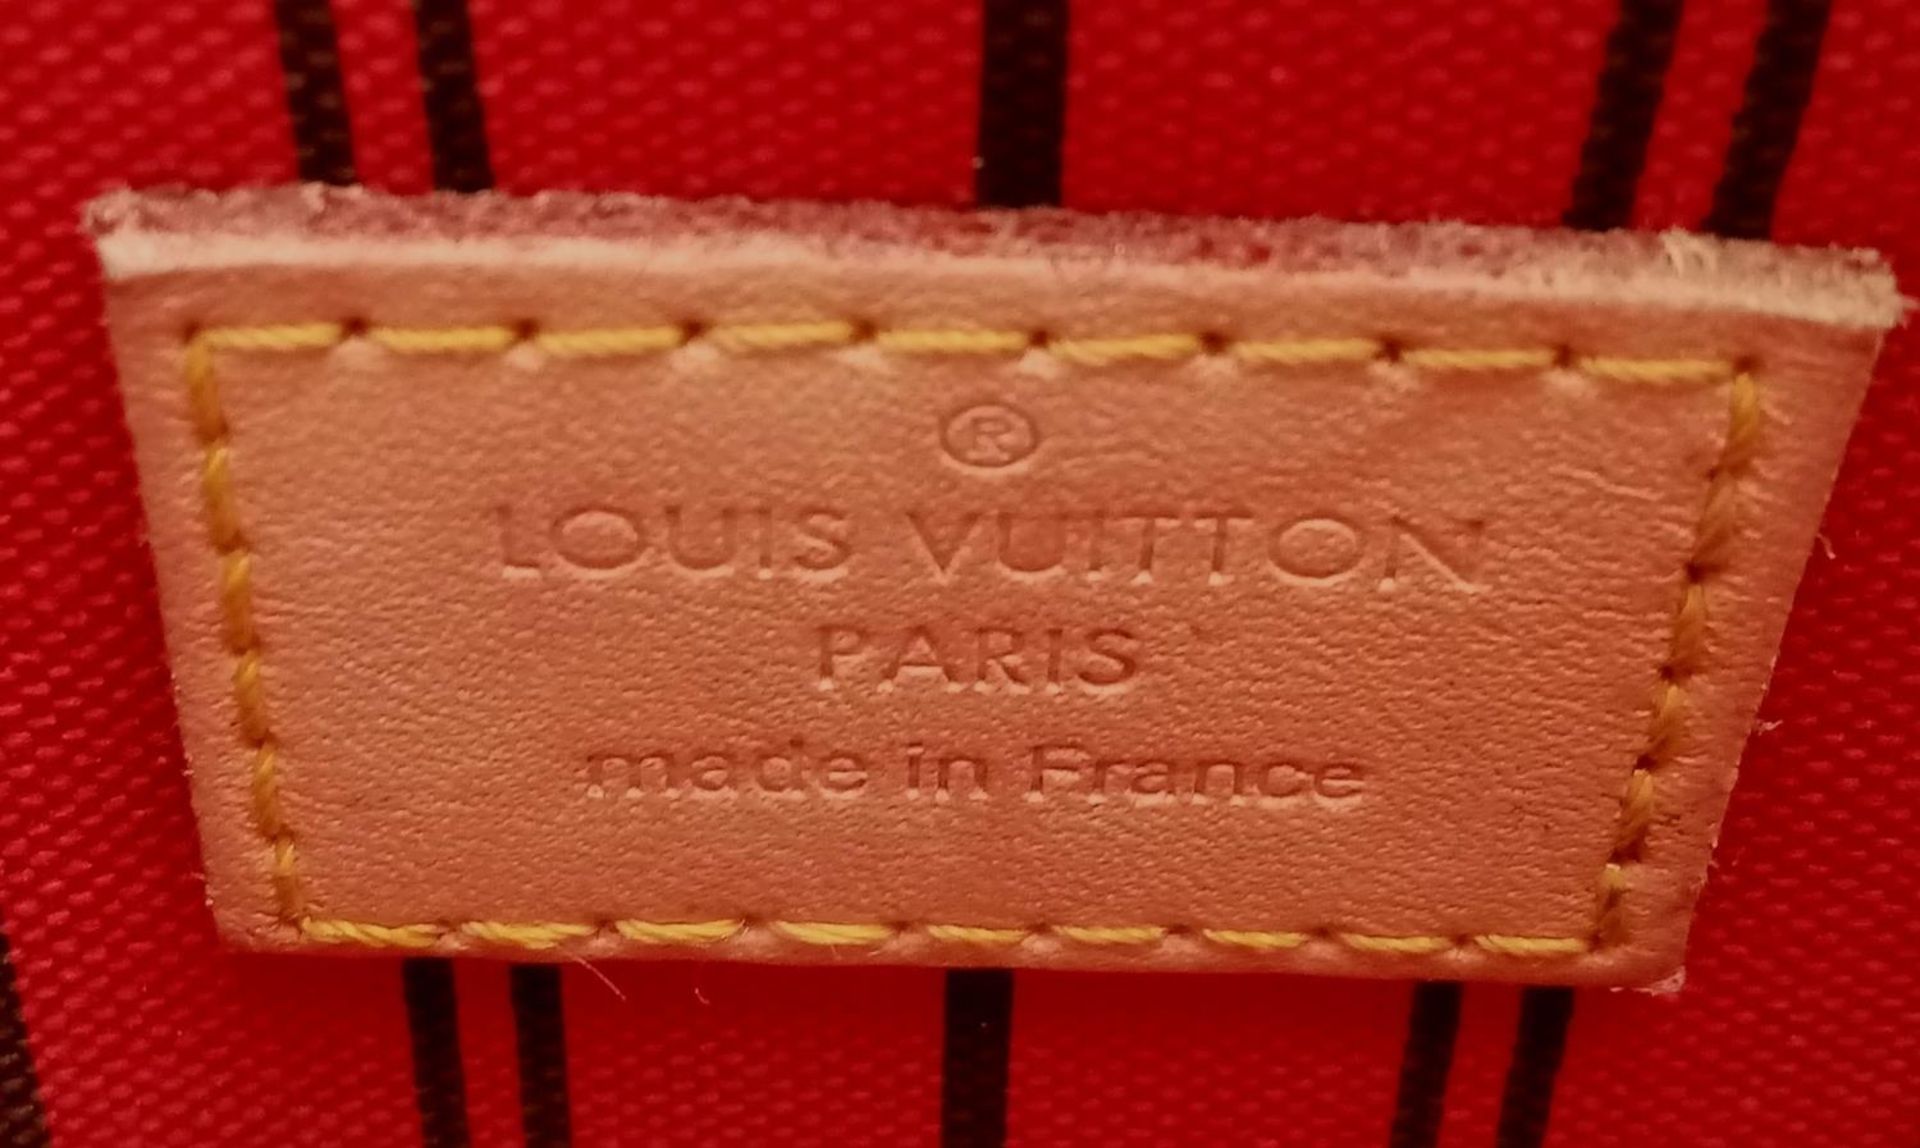 A Louis Vuitton Neverfull Pochette. Monogramed canvas exterior with gold-toned hardware and zip - Image 6 of 7